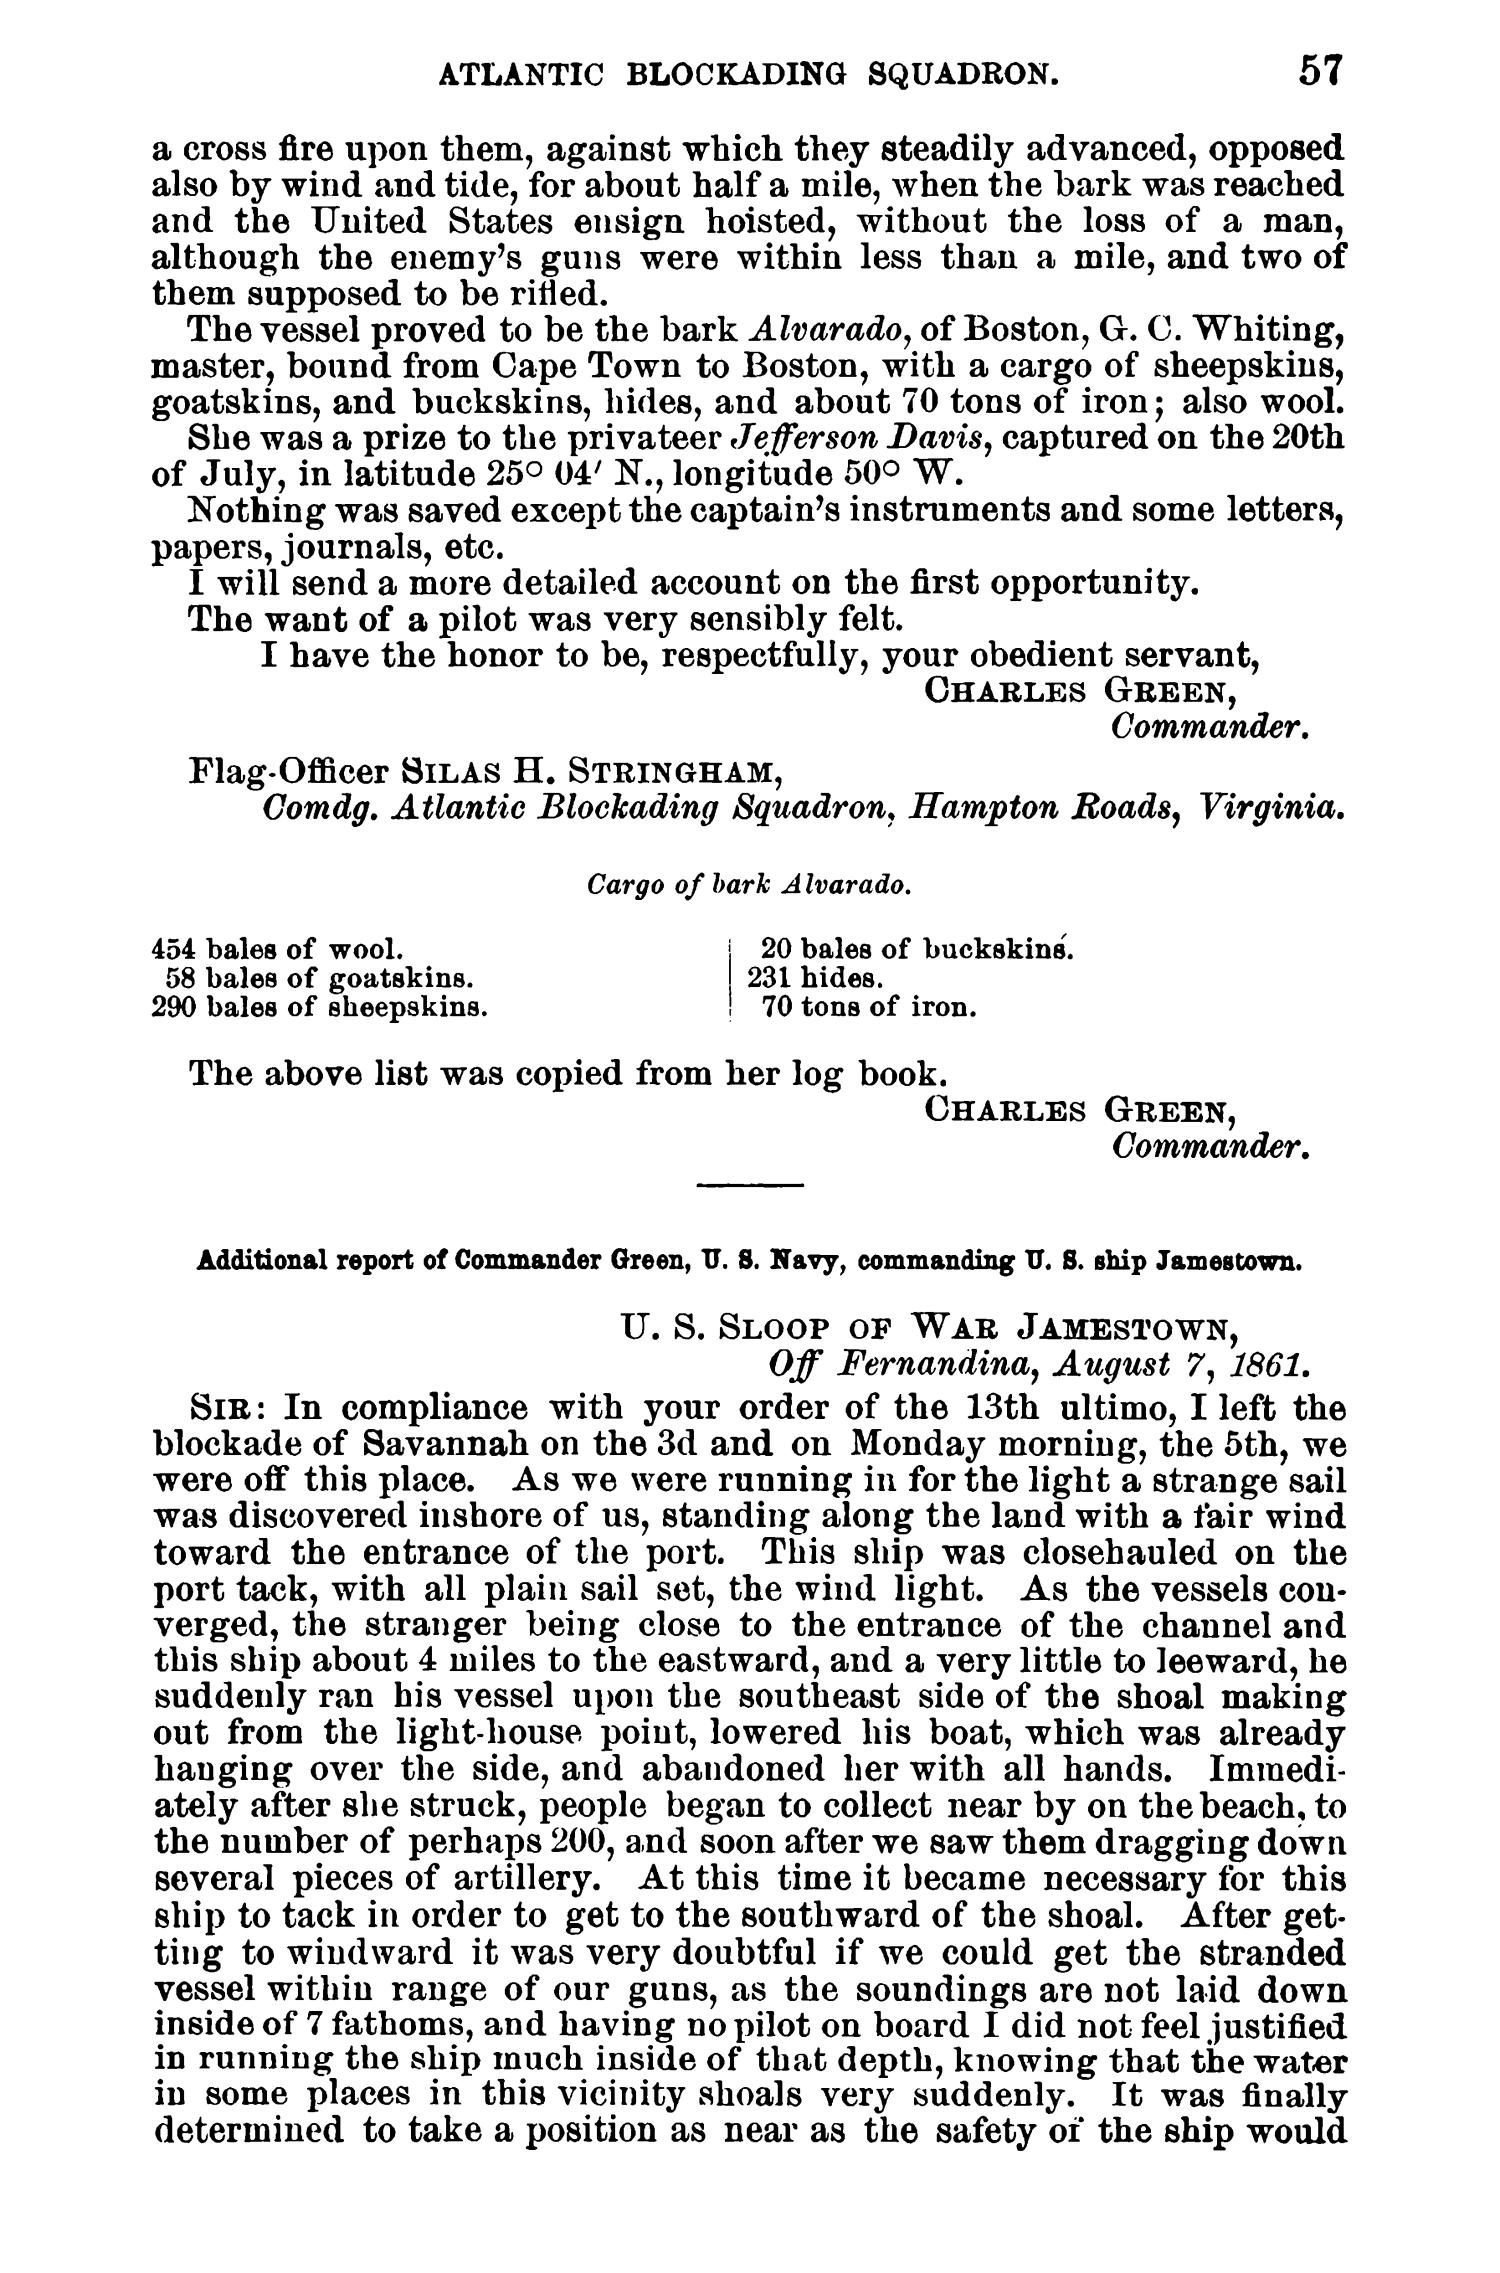 Official Records of the Union and Confederate Navies in the War of the Rebellion. Series 1, Volume 6.
                                                
                                                    57
                                                